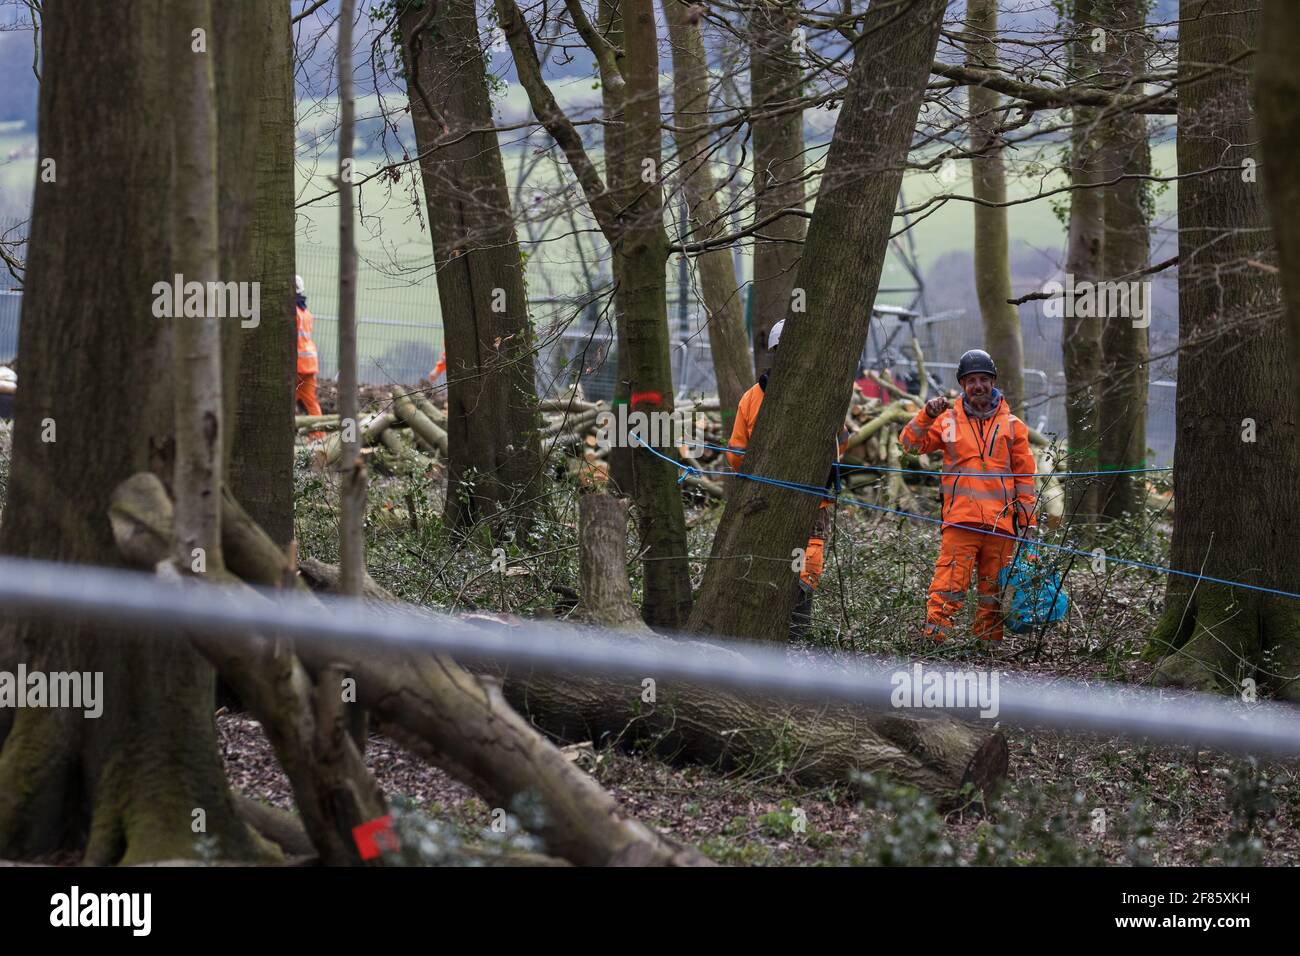 Wendover, UK. 9th April, 2021. HS2 contractors are pictured at Jones Hill Wood, ancient woodland said to have inspired Roald Dahl, during tree felling operations for the HS2 high-speed rail link. Tree felling work began this week, in spite of the presence of resting places and/or breeding sites for pipistrelle, barbastelle, noctule, brown long-eared and natterer's bats, following the issuing of a bat licence to HS2's contractors by Natural England on 30th March. Credit: Mark Kerrison/Alamy Live News Stock Photo